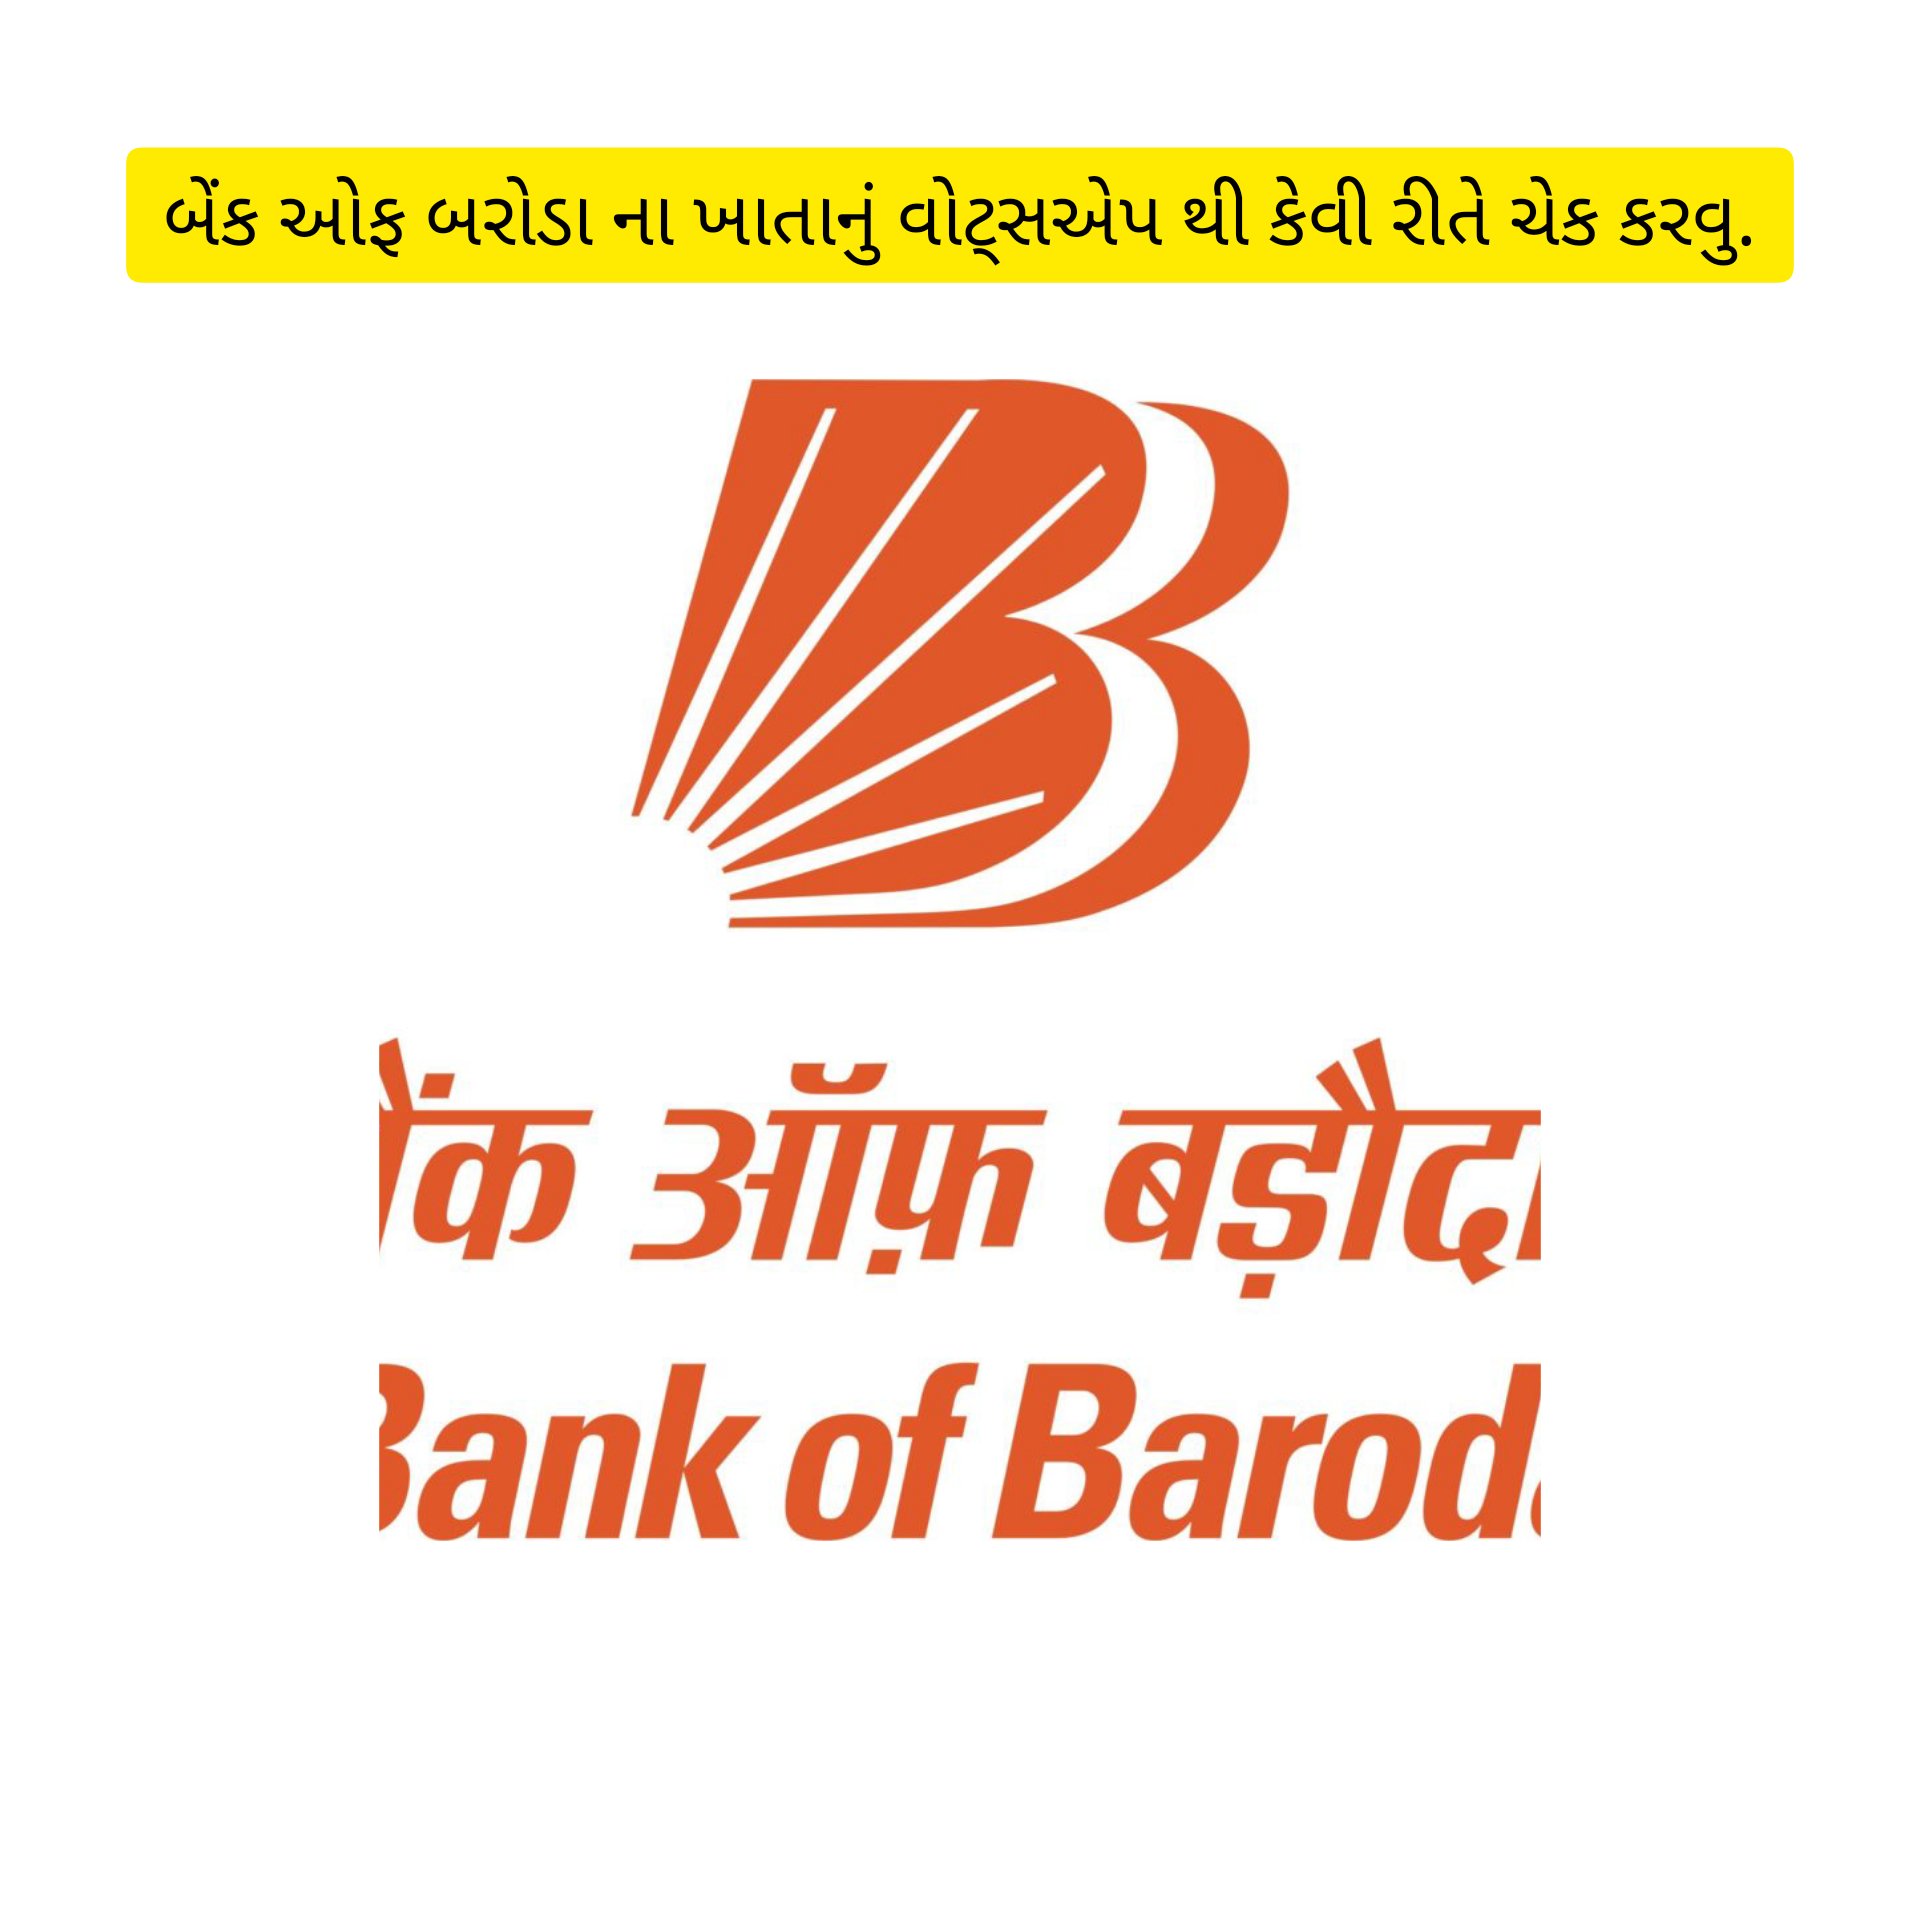 How to check Bank of Baroda account from WhatsApp.